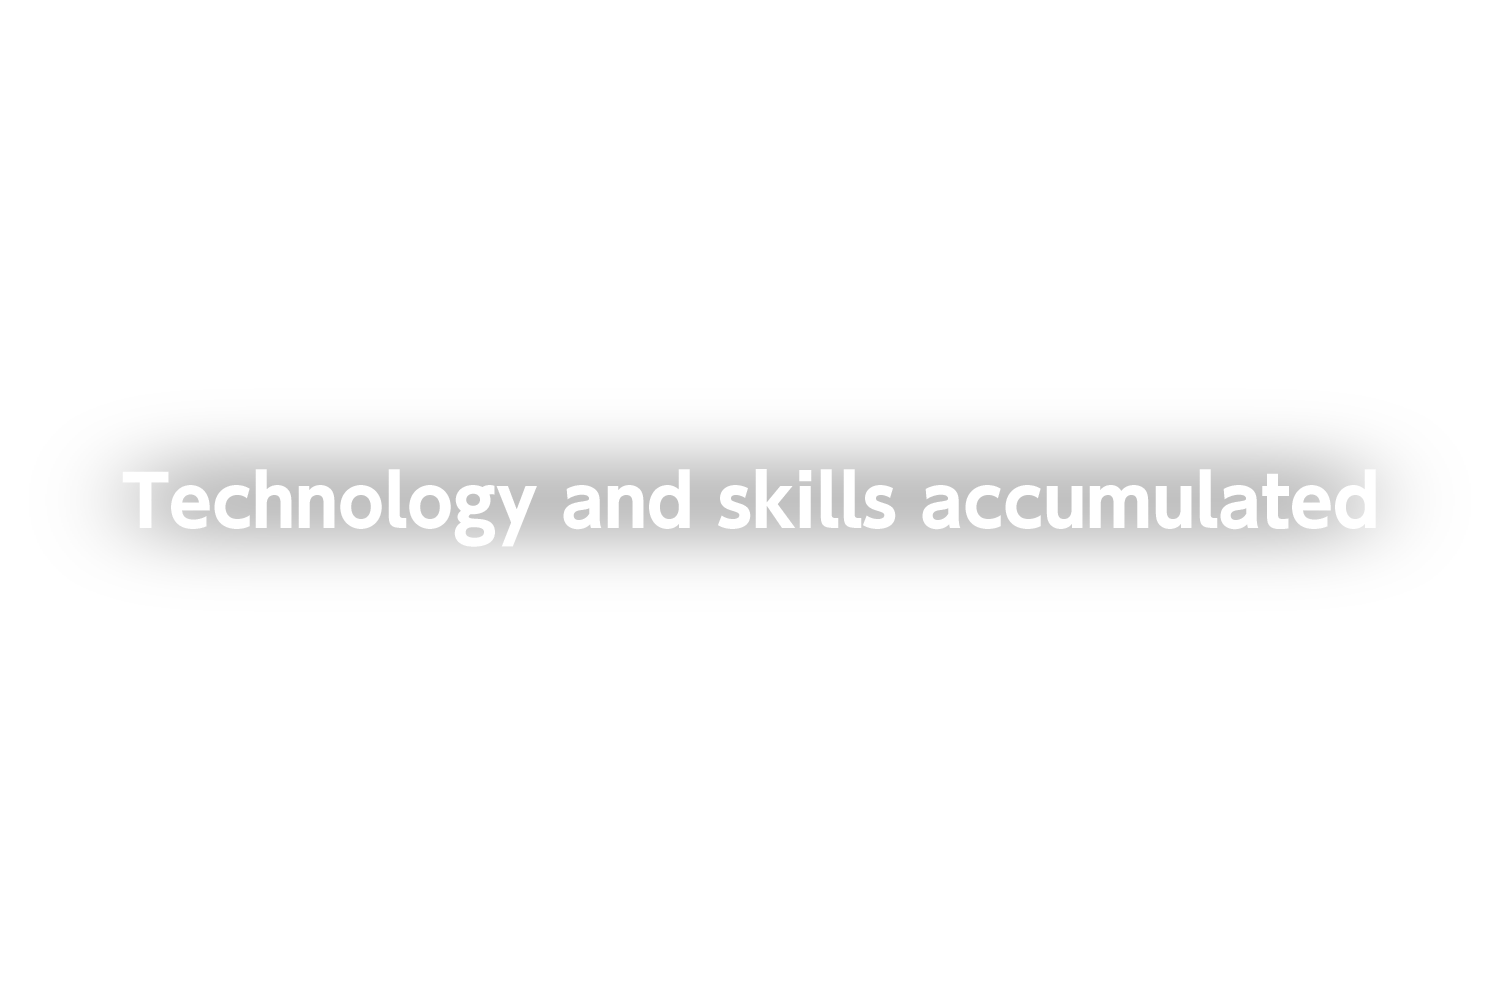 Technology and skills accumulated